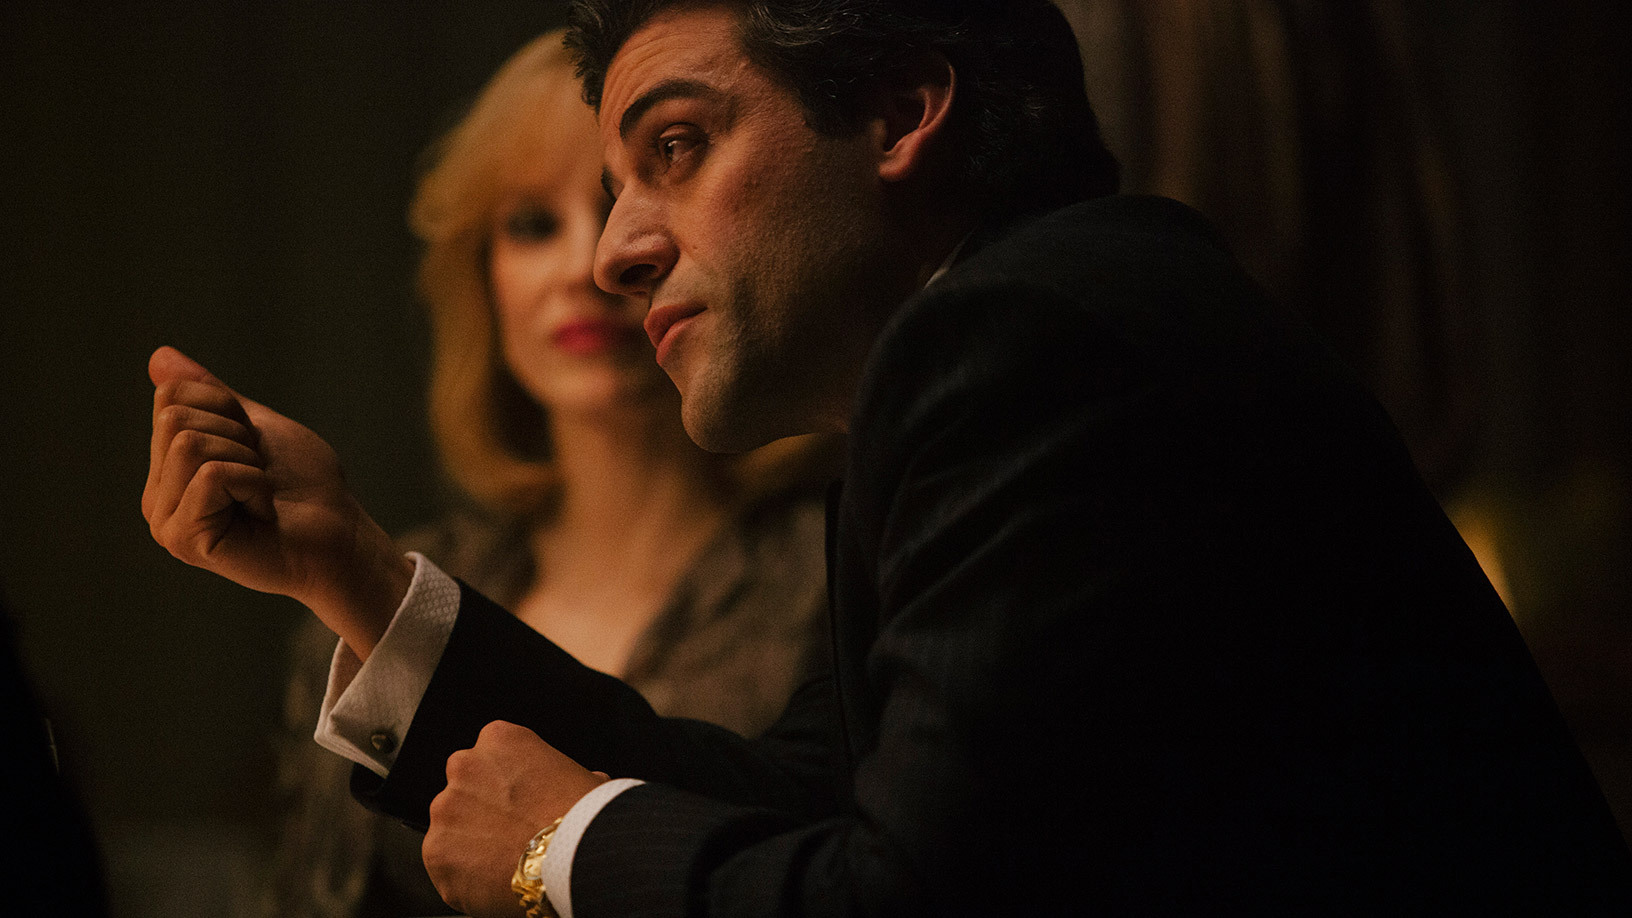 Still of Oscar Isaac and Jessica Chastain in A Most Violent Year (2014)